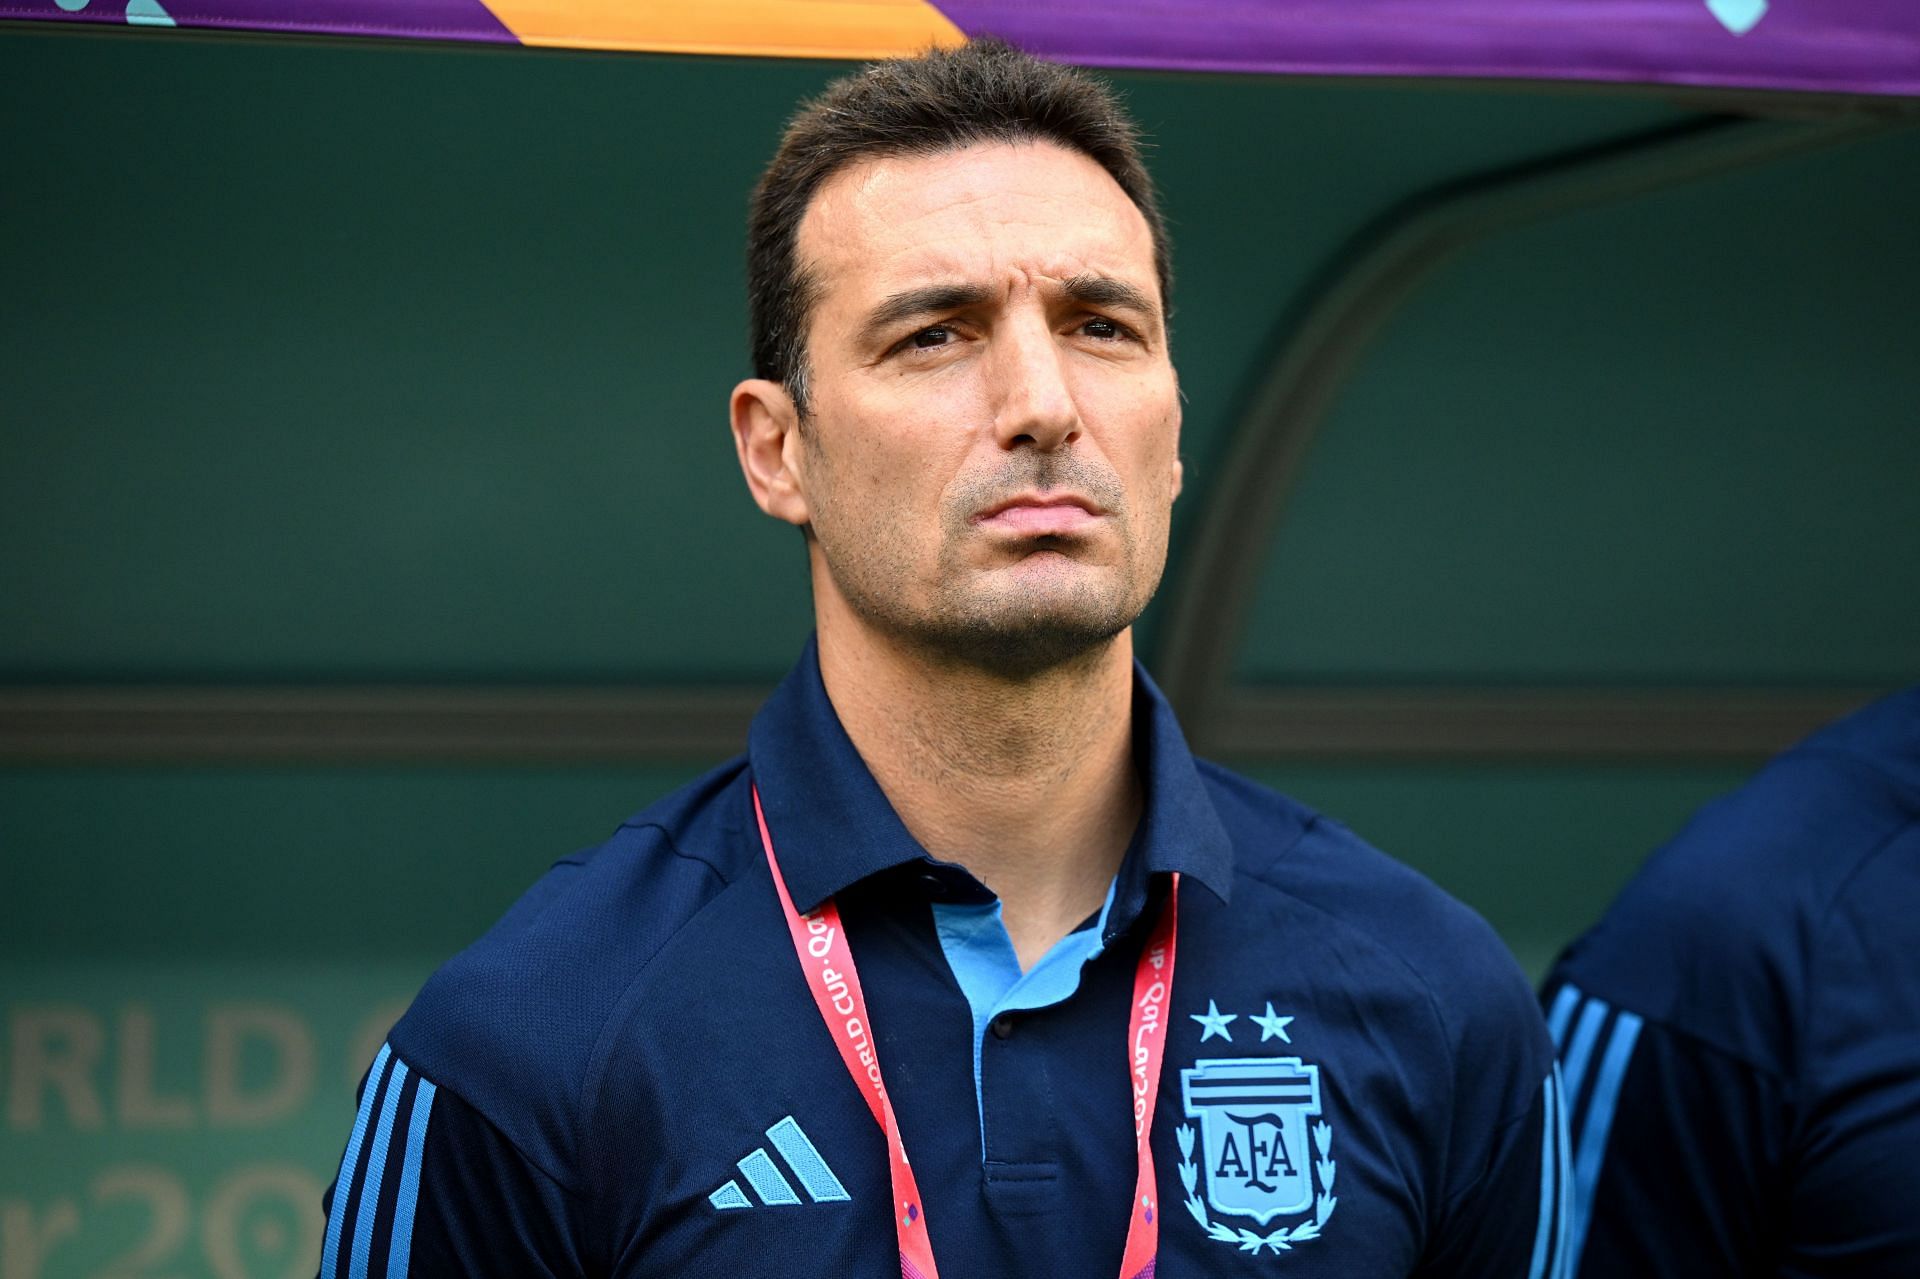 Scaloni is the current head coach of Argentina